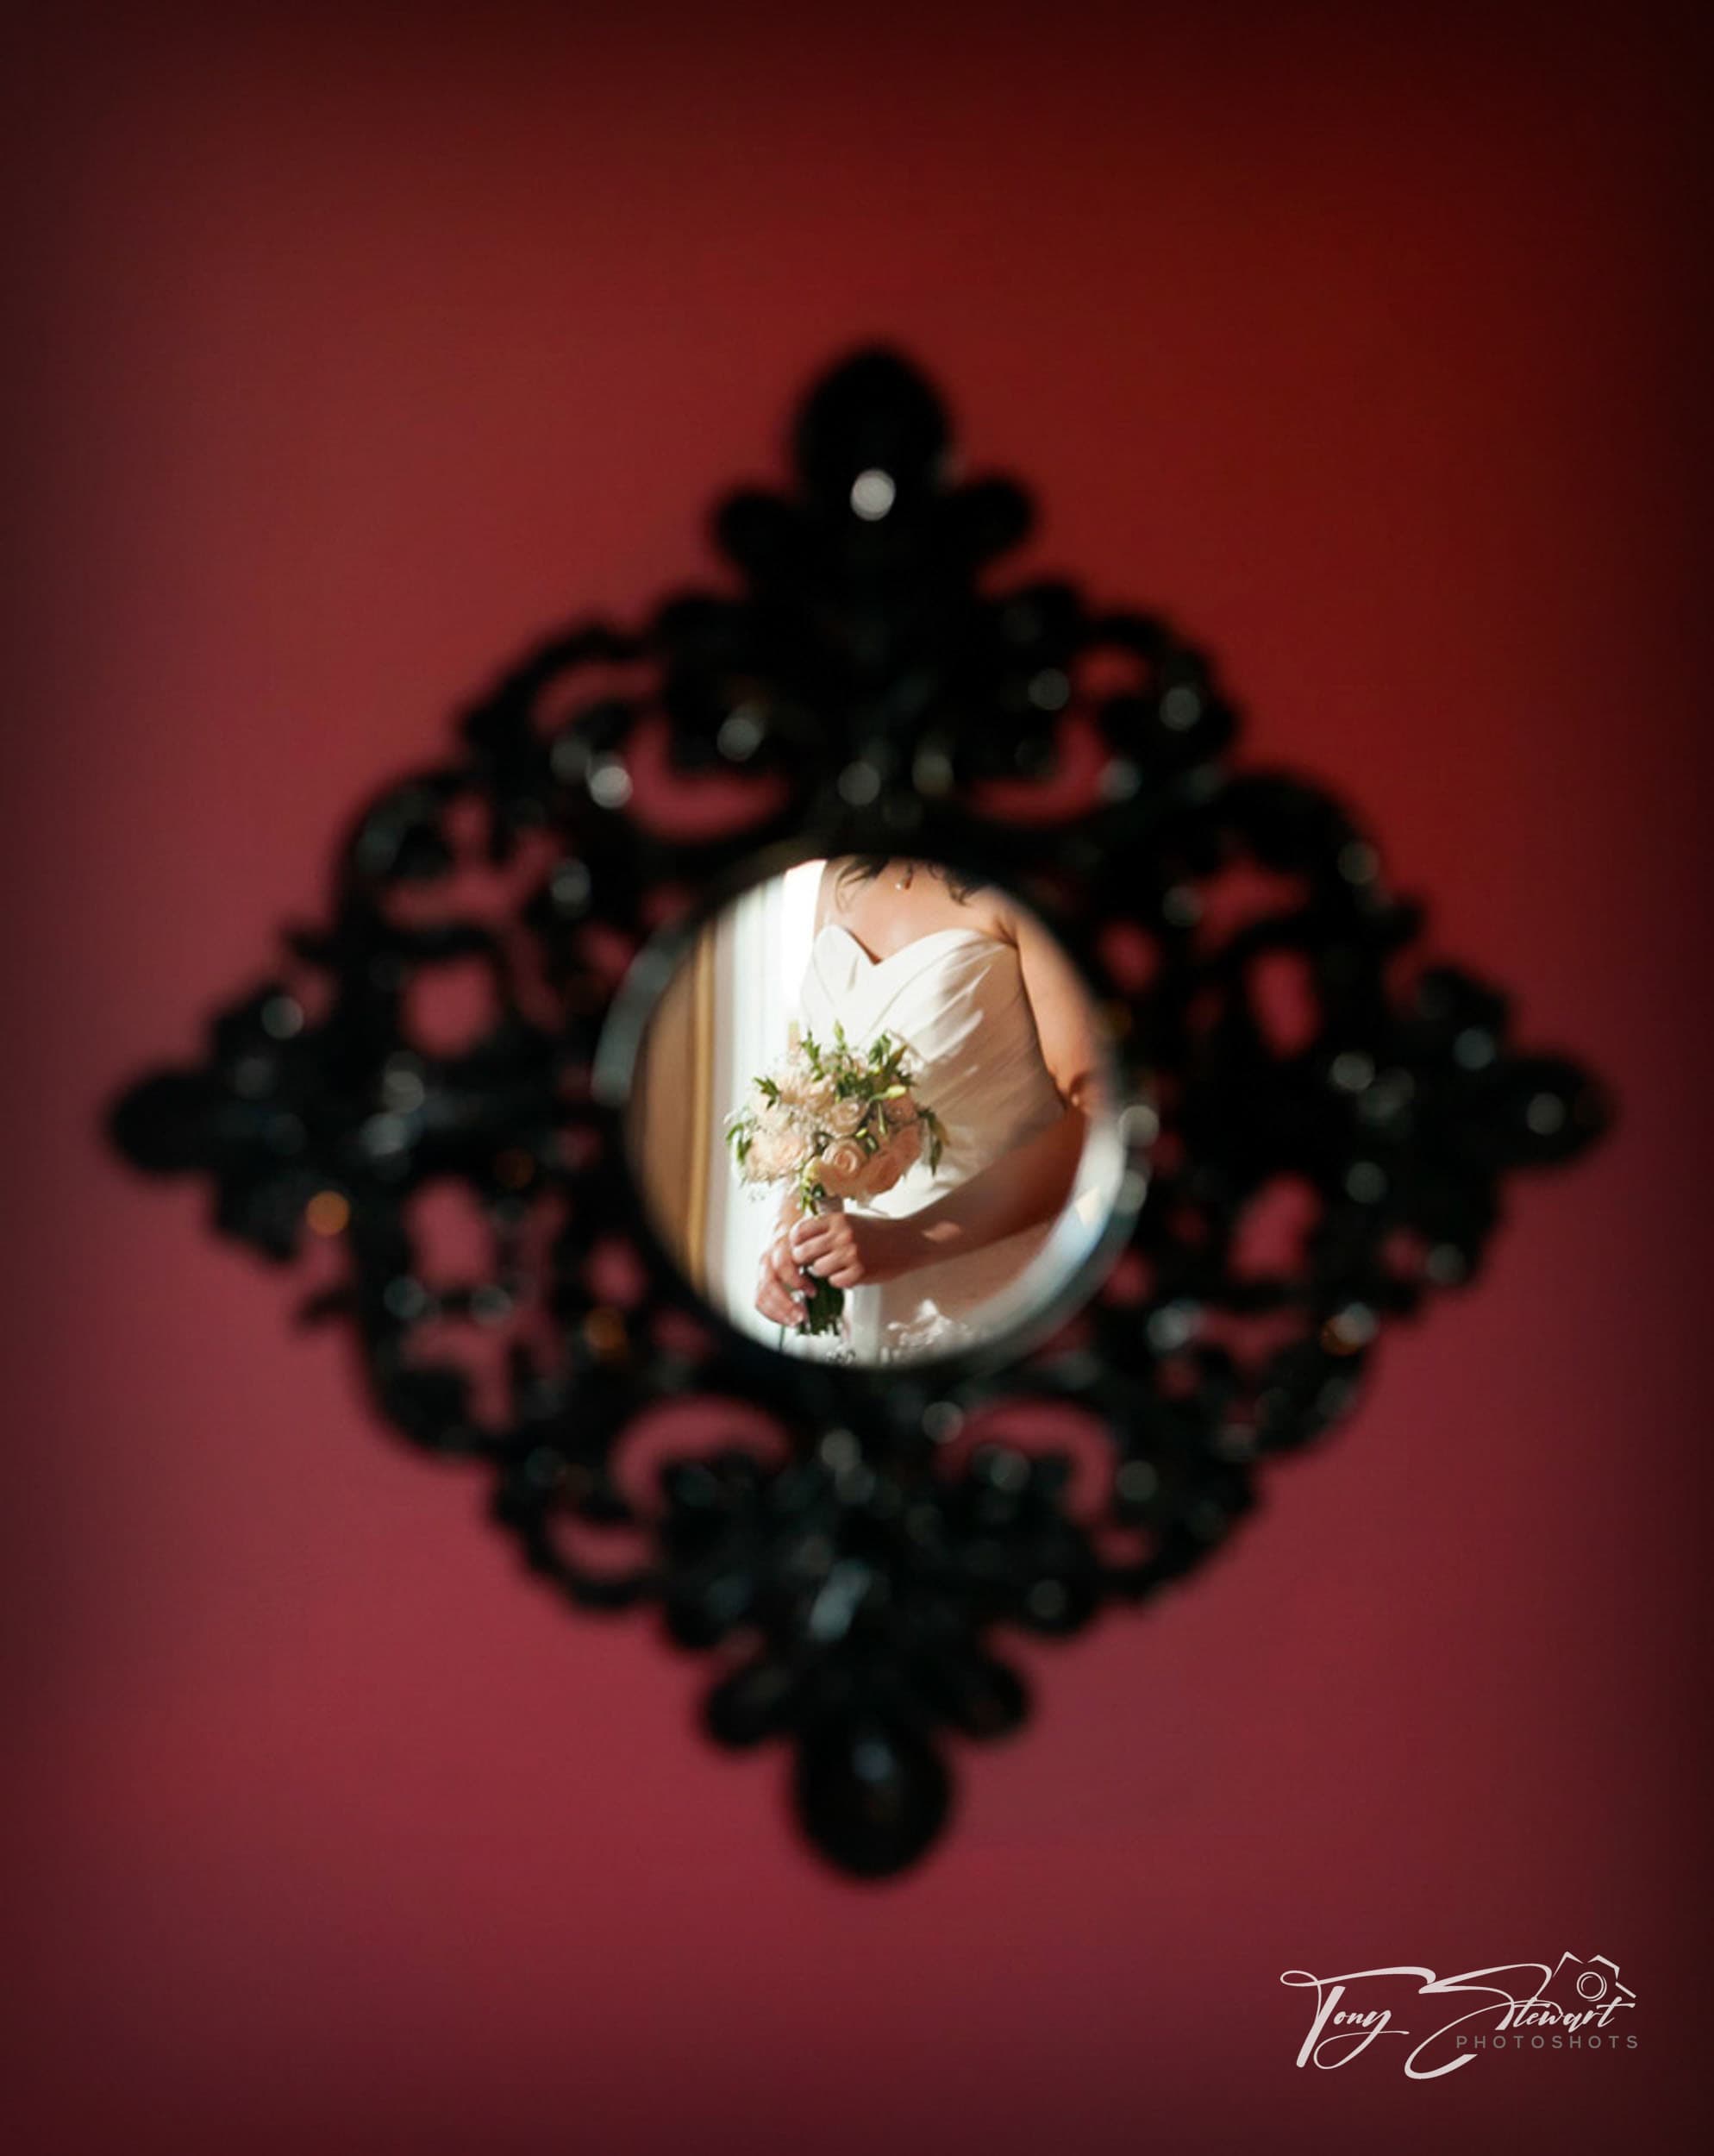 Bride's torso and flowers cropped within the circle of a decorative mirror.